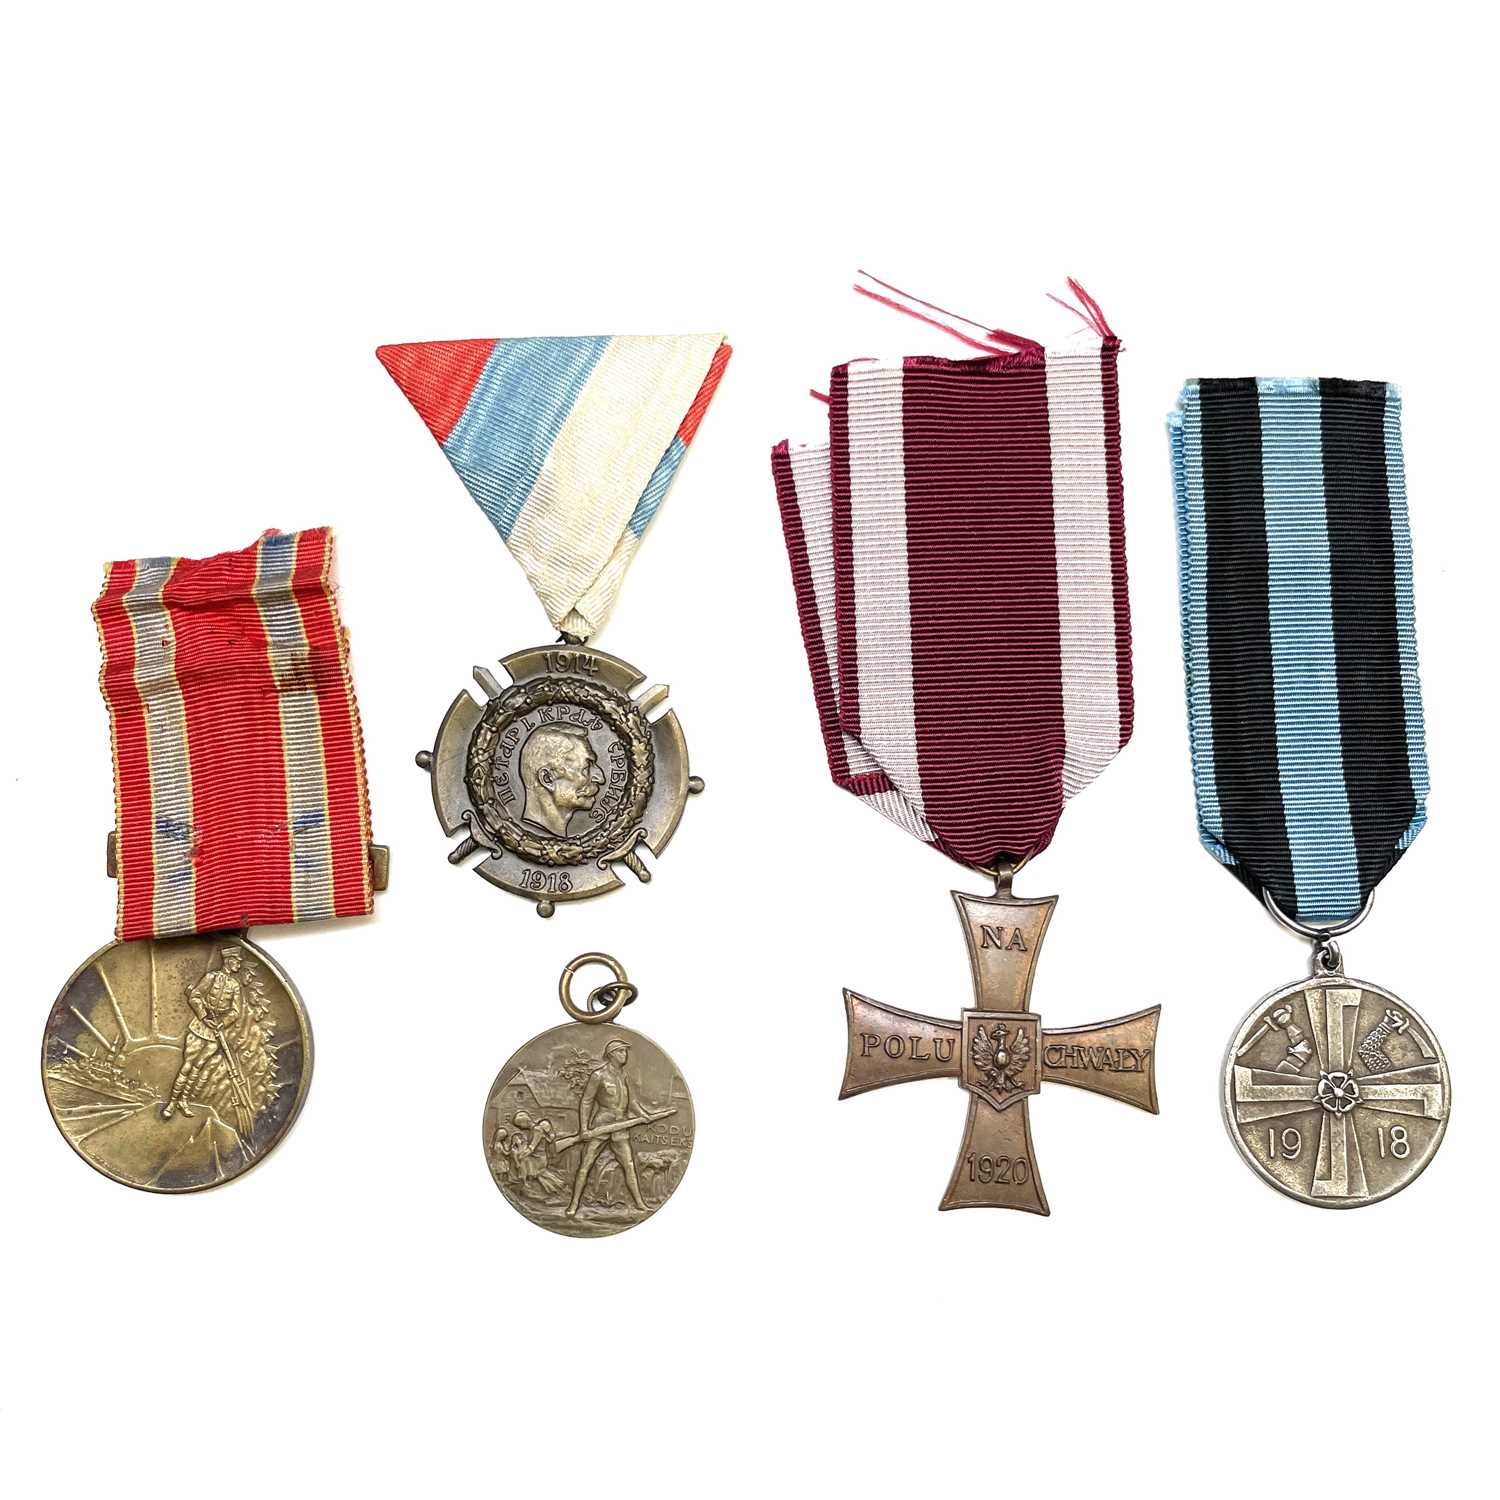 WWI Medals. Serbia and Montenegro War Commemorative Medal, Poland Cross of Valour, Latvia Medal - Image 2 of 2